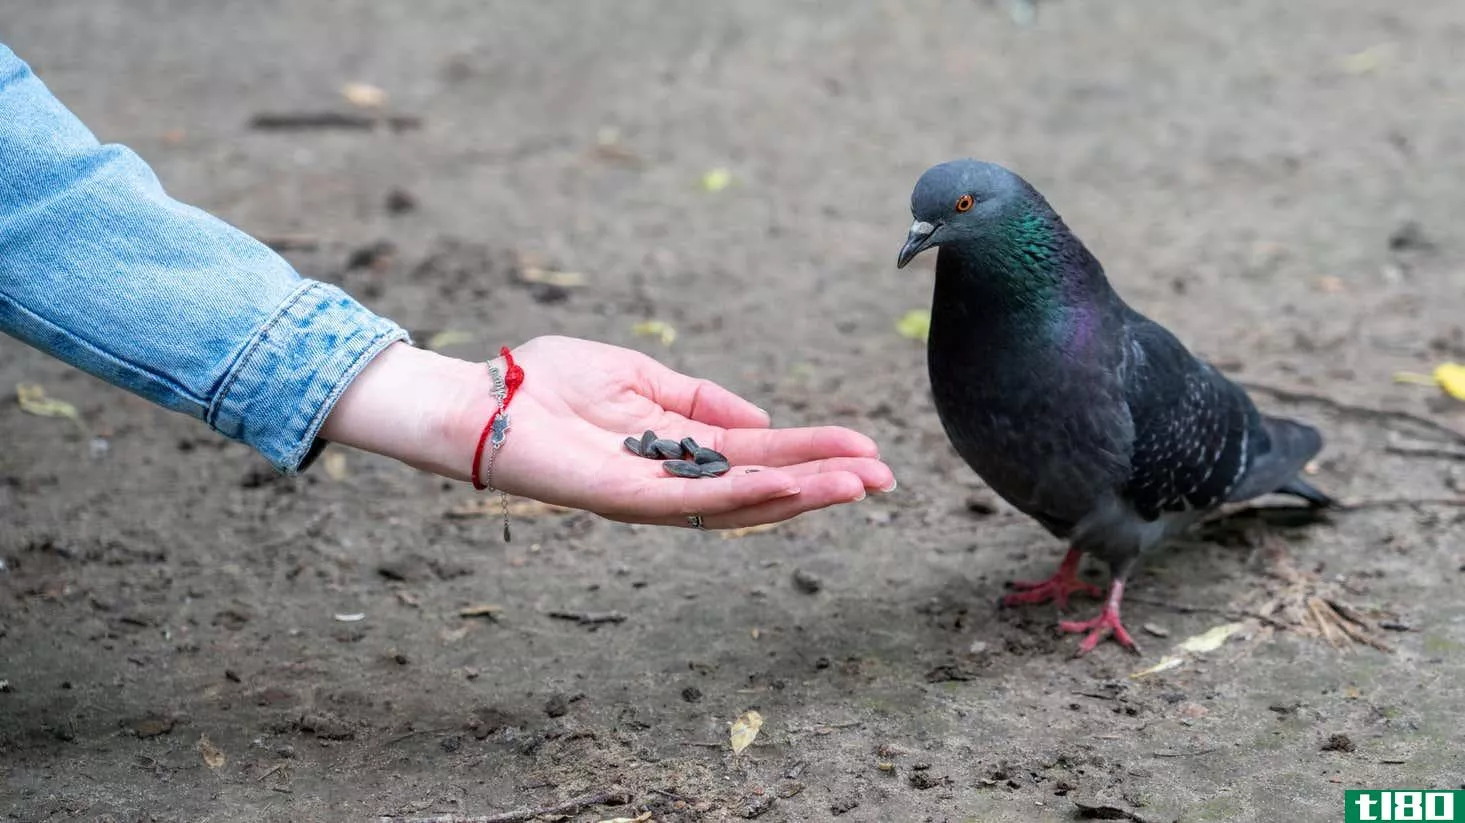 A pigeon pecks at seeds in a woman's outstretched palm